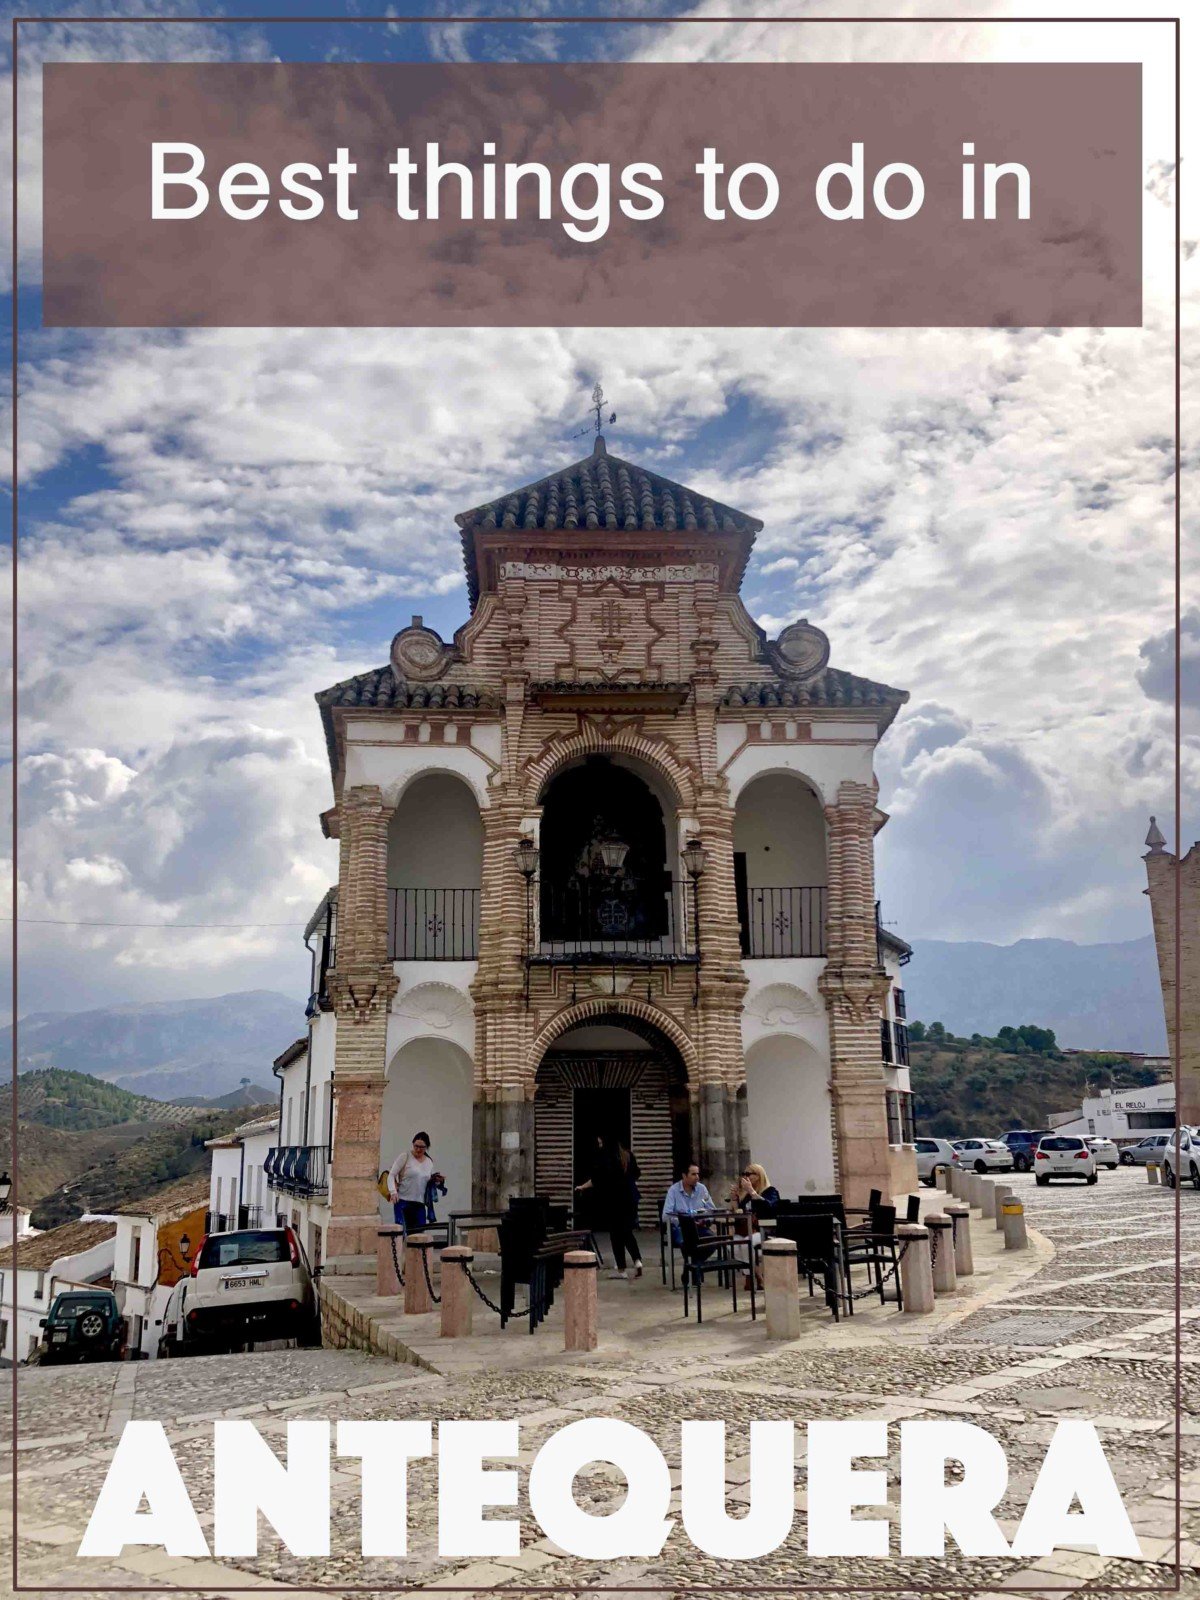 Best things to do in when you visit Antequera Spain, beautiful Churches and history in this day trip from Malaga